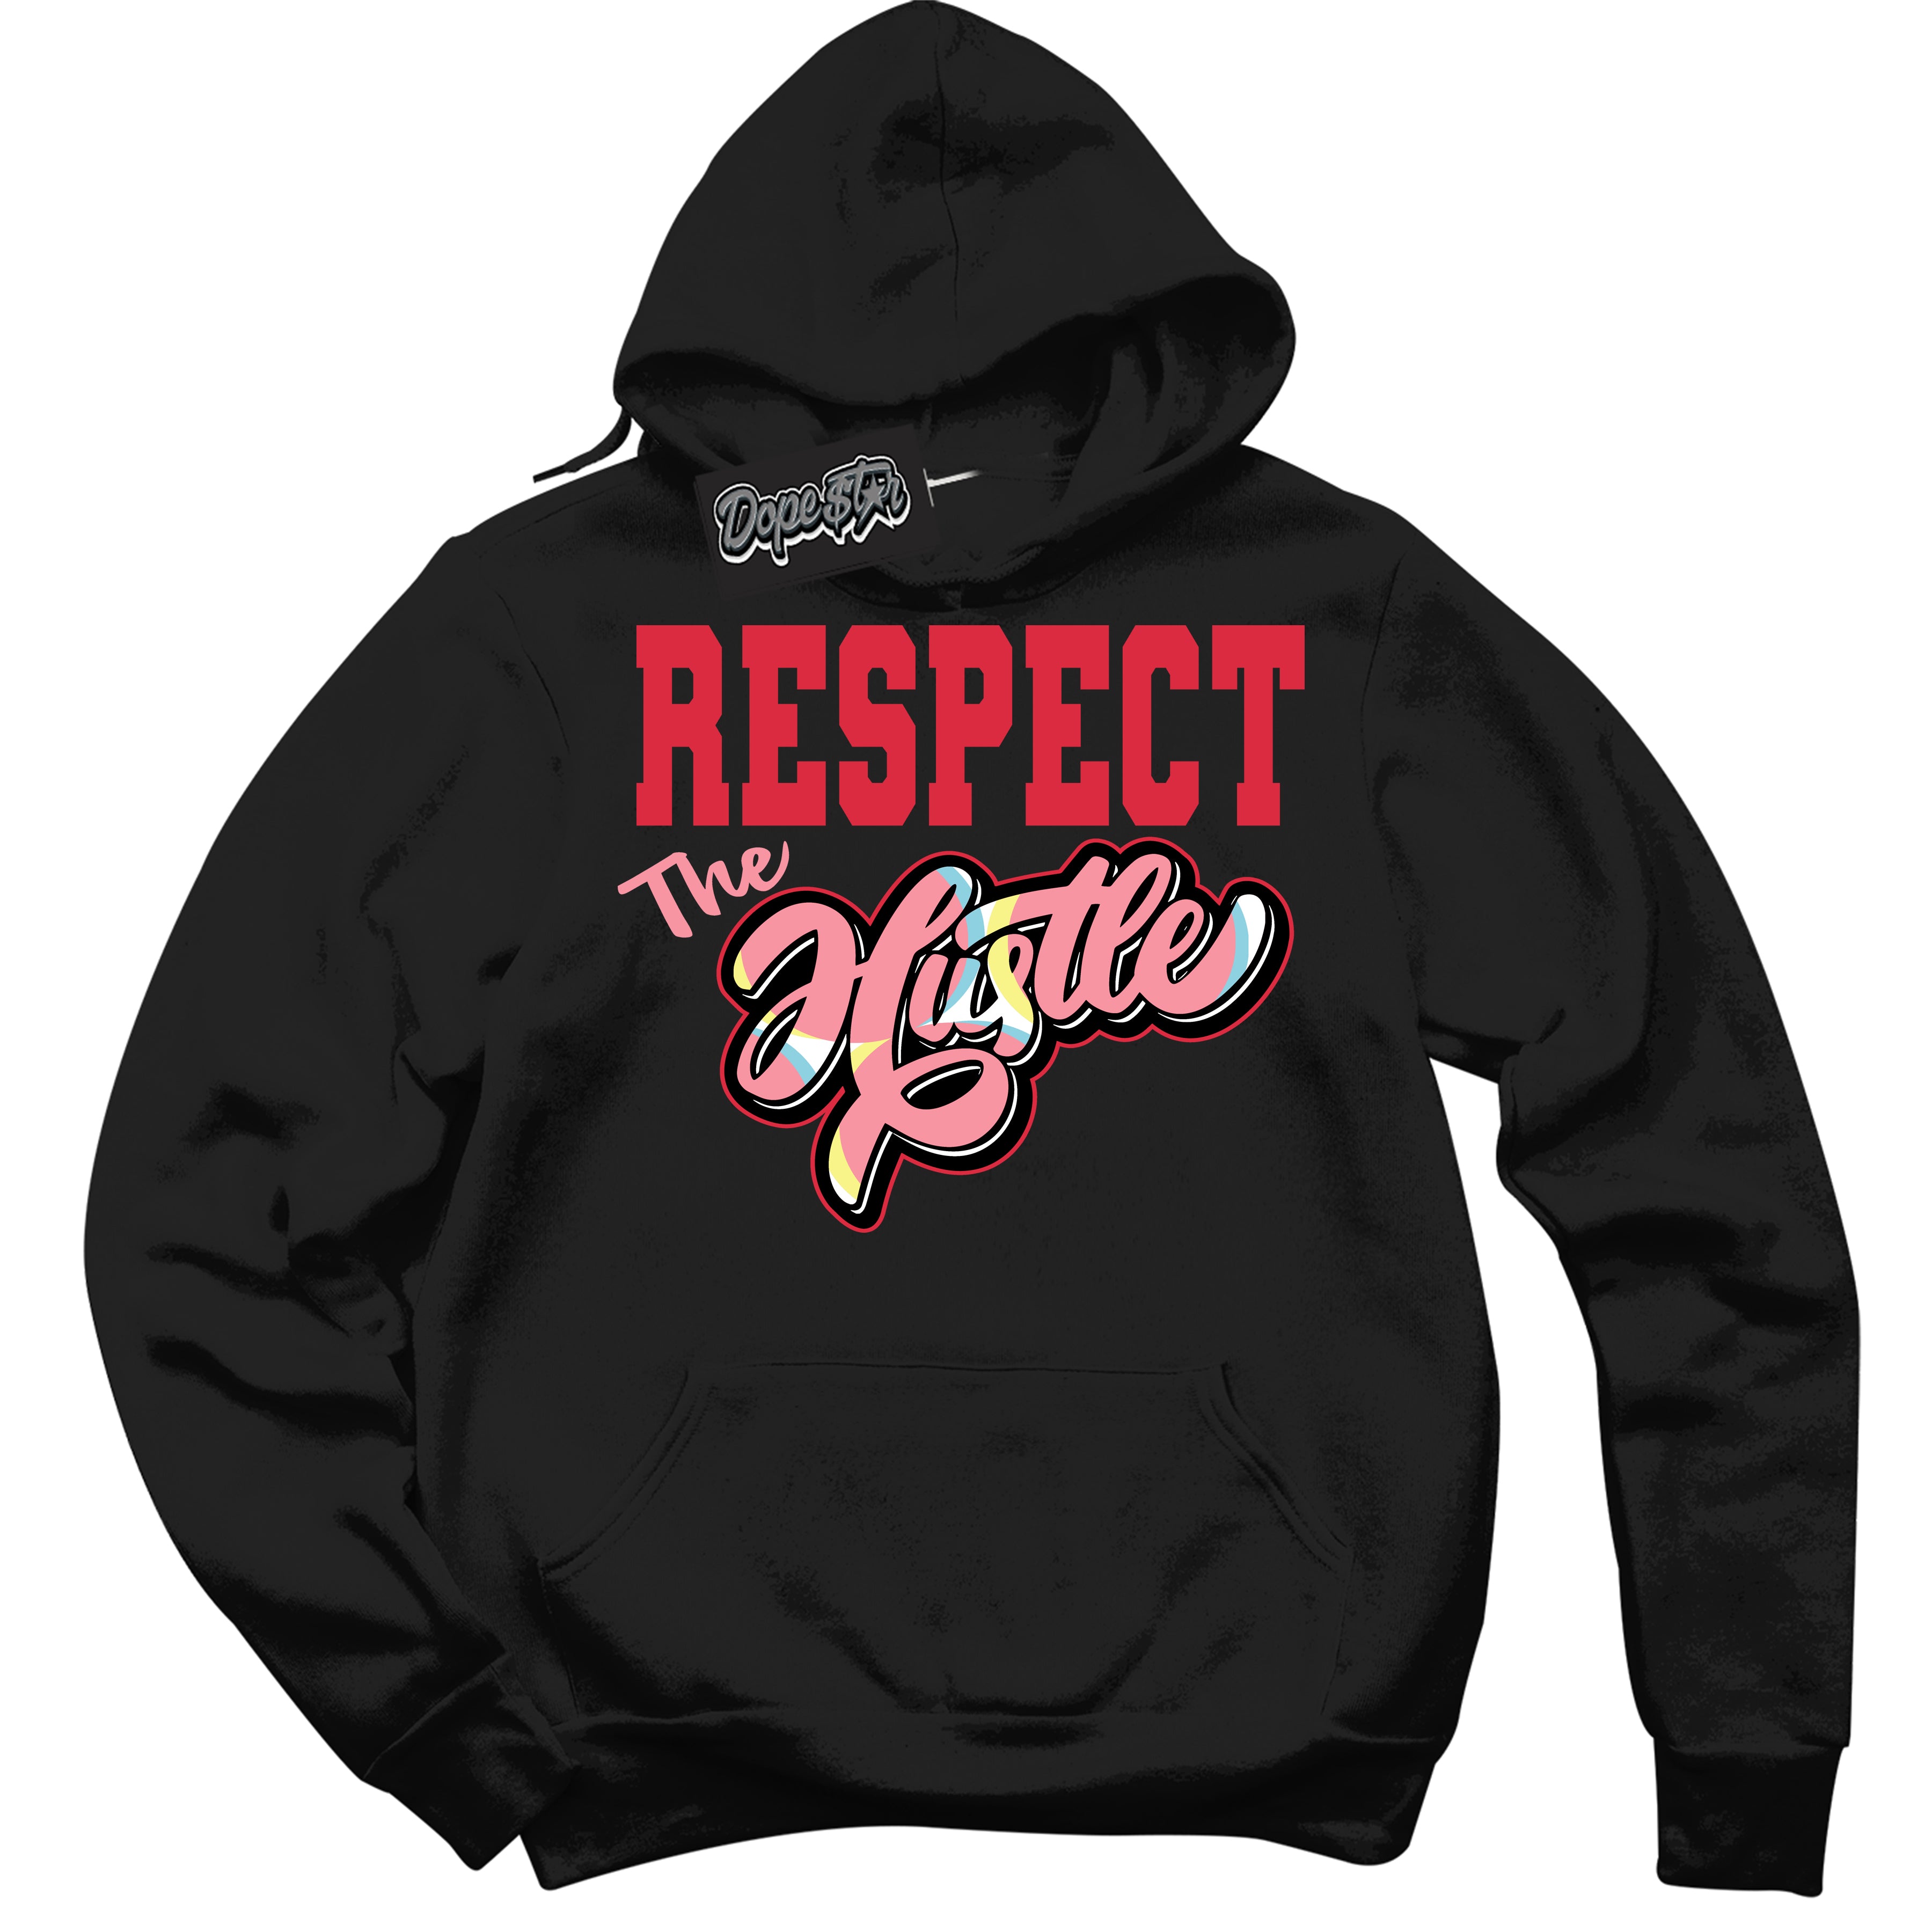 Cool Black Graphic DopeStar Hoodie with “ Respect The Hustle “ print, that perfectly matches Spider-Verse 1s sneakers